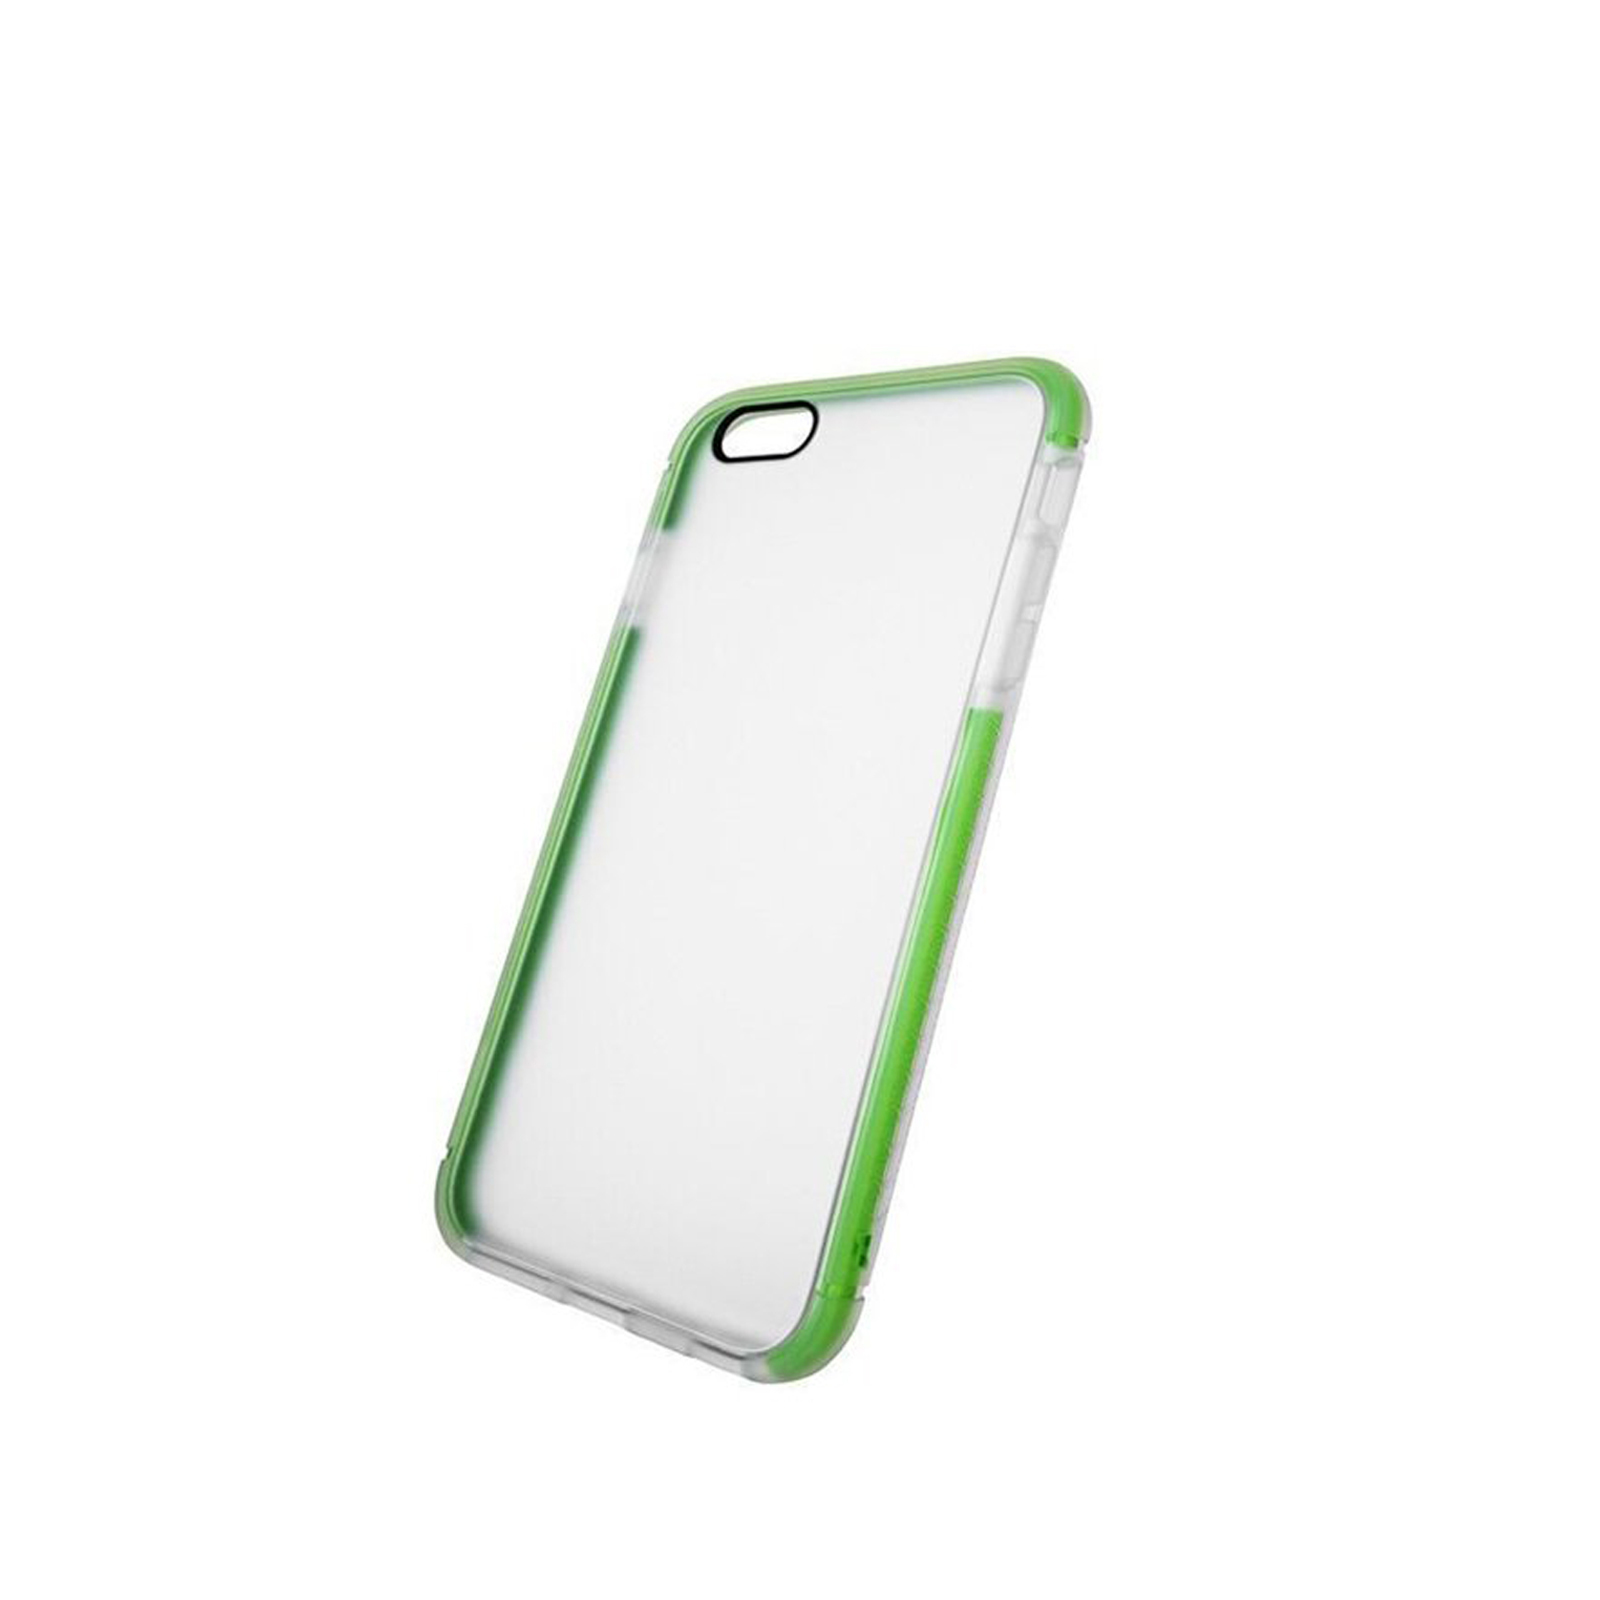 Contact iPhone 6 / 7 / 8 Case [Clear]